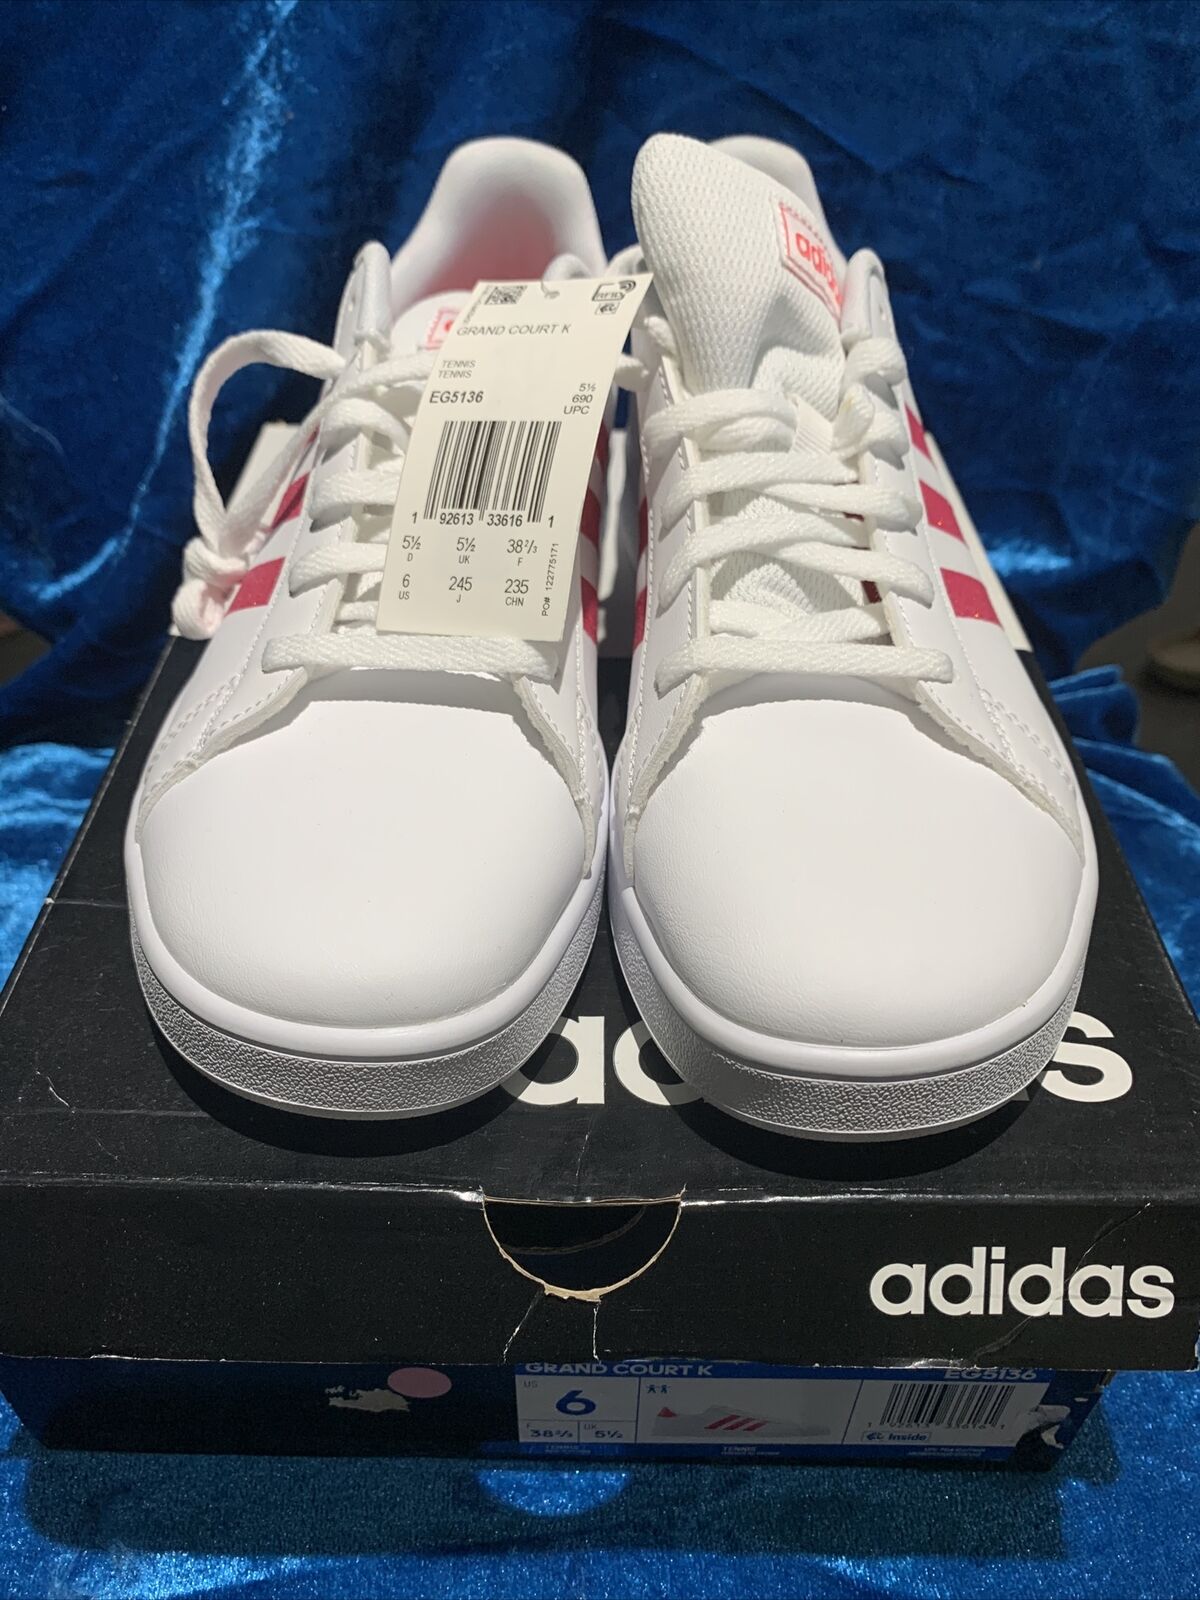 Adidas Grand Court K Shoes Pink Size 6 Y Girls Youth EG5136 Brand New!